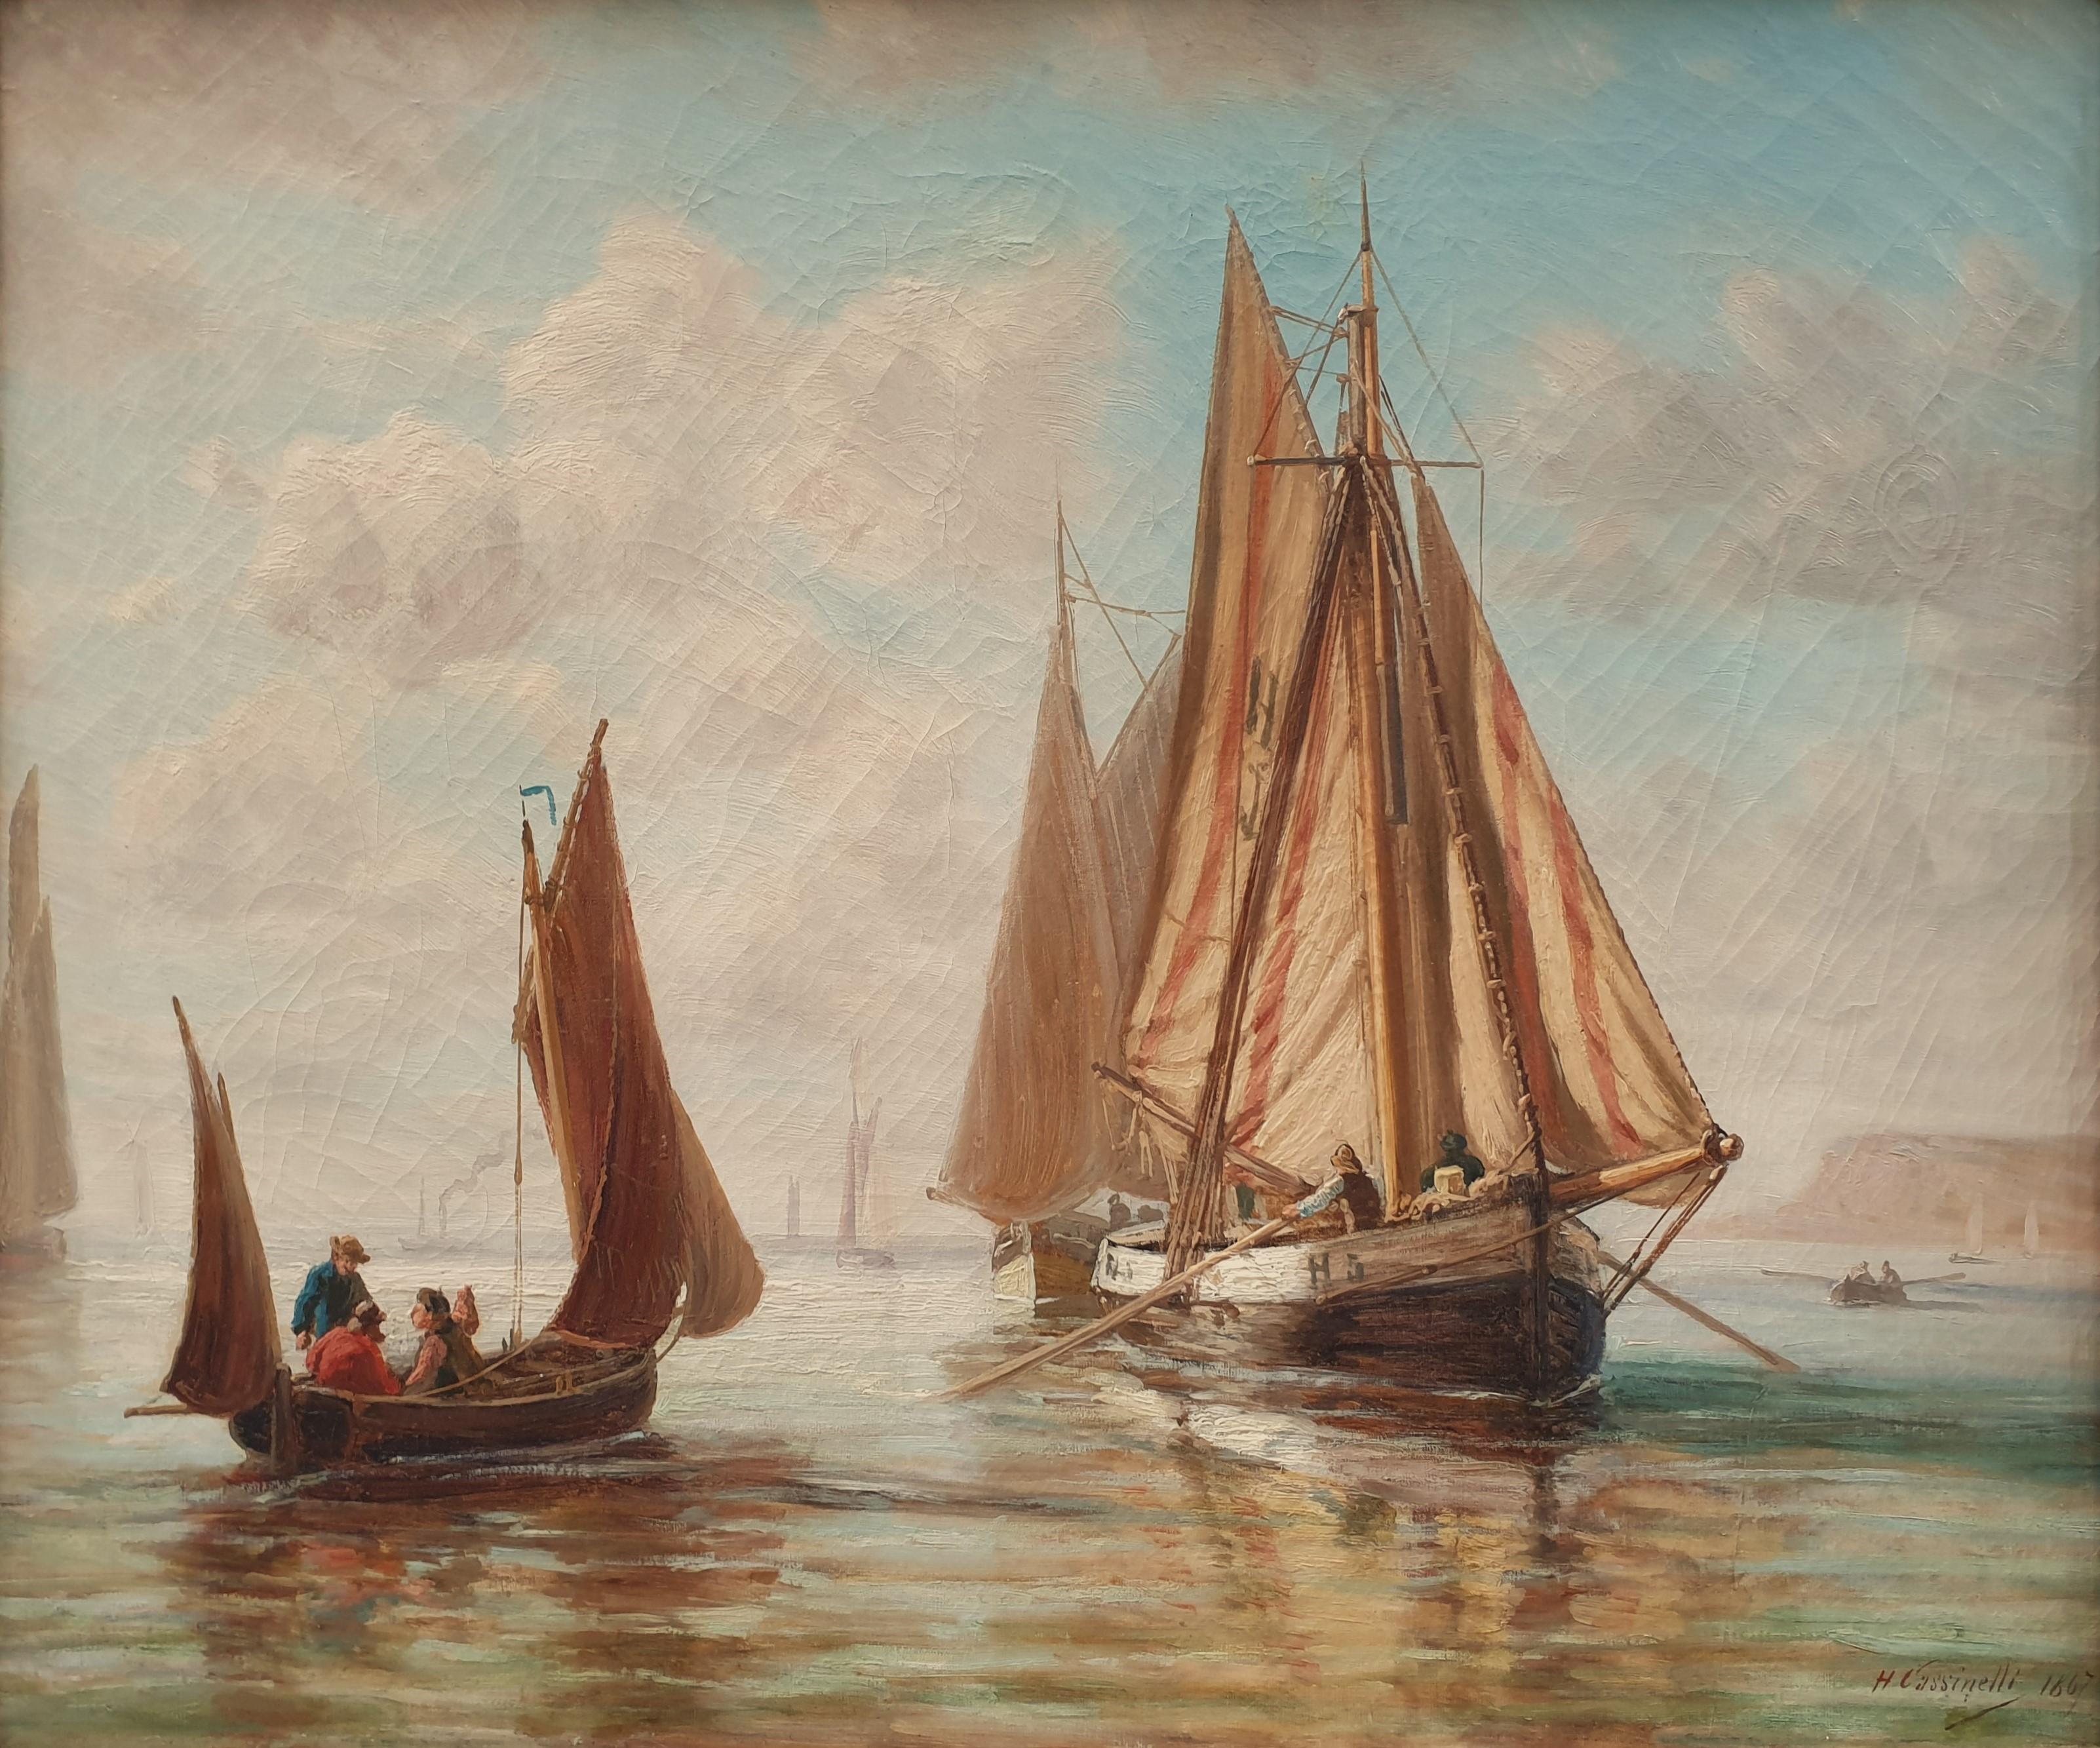 CASSINELLI friend BOUDIN Marine Boats Normandy Honfleur Impressionnist 19th - Painting by Henri CASSINELLI